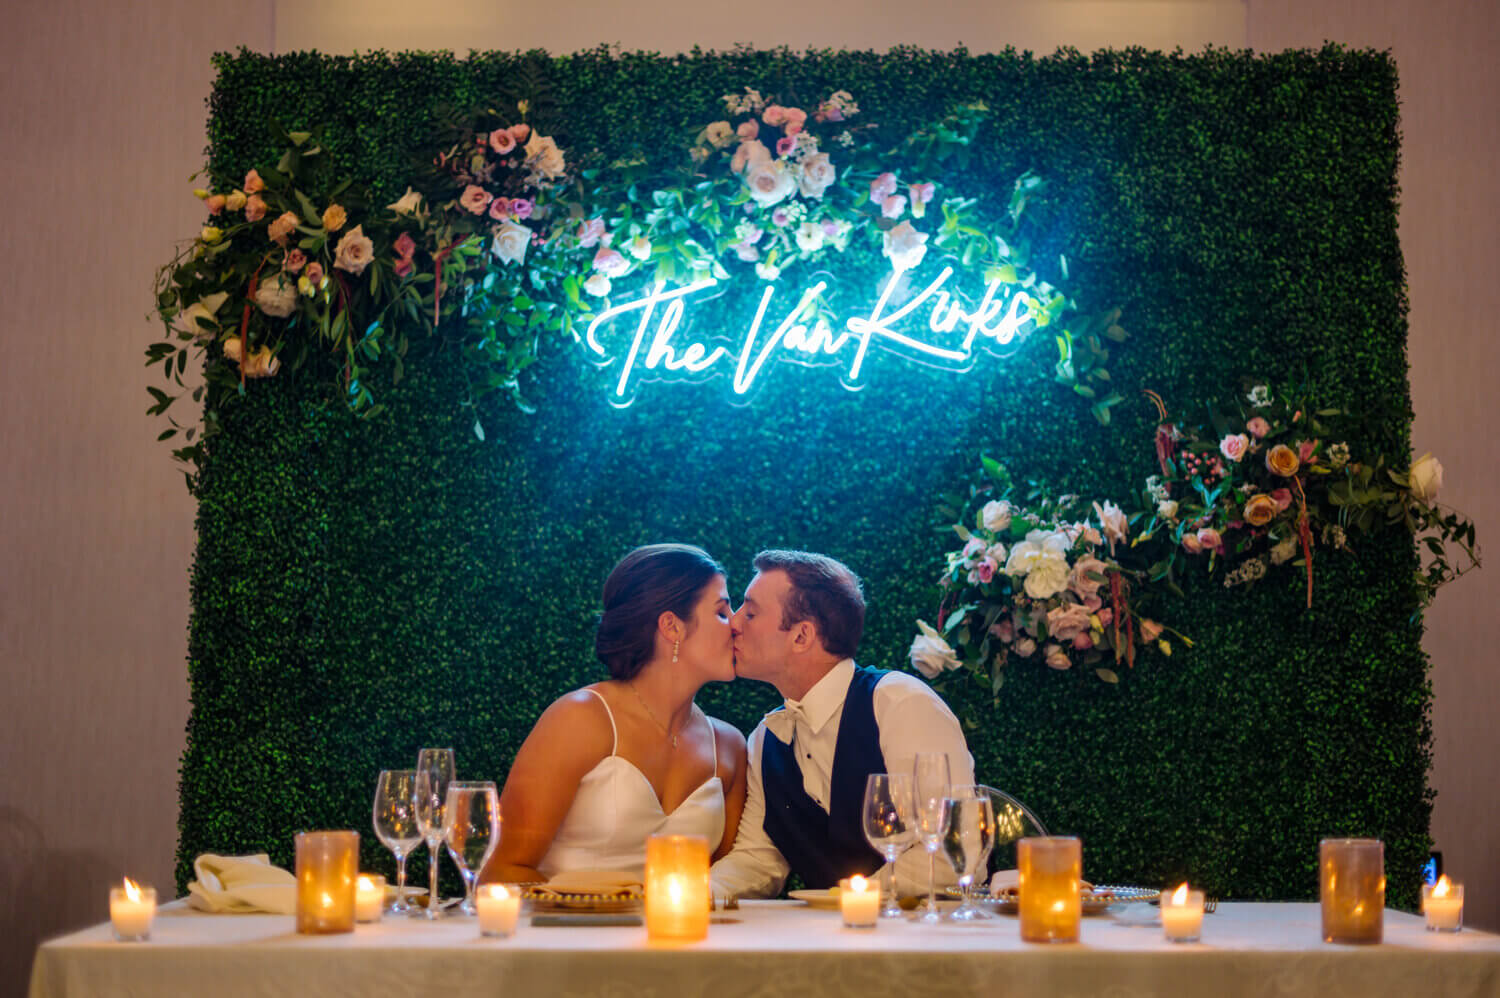 Use neon wedding signs for sweetheart table